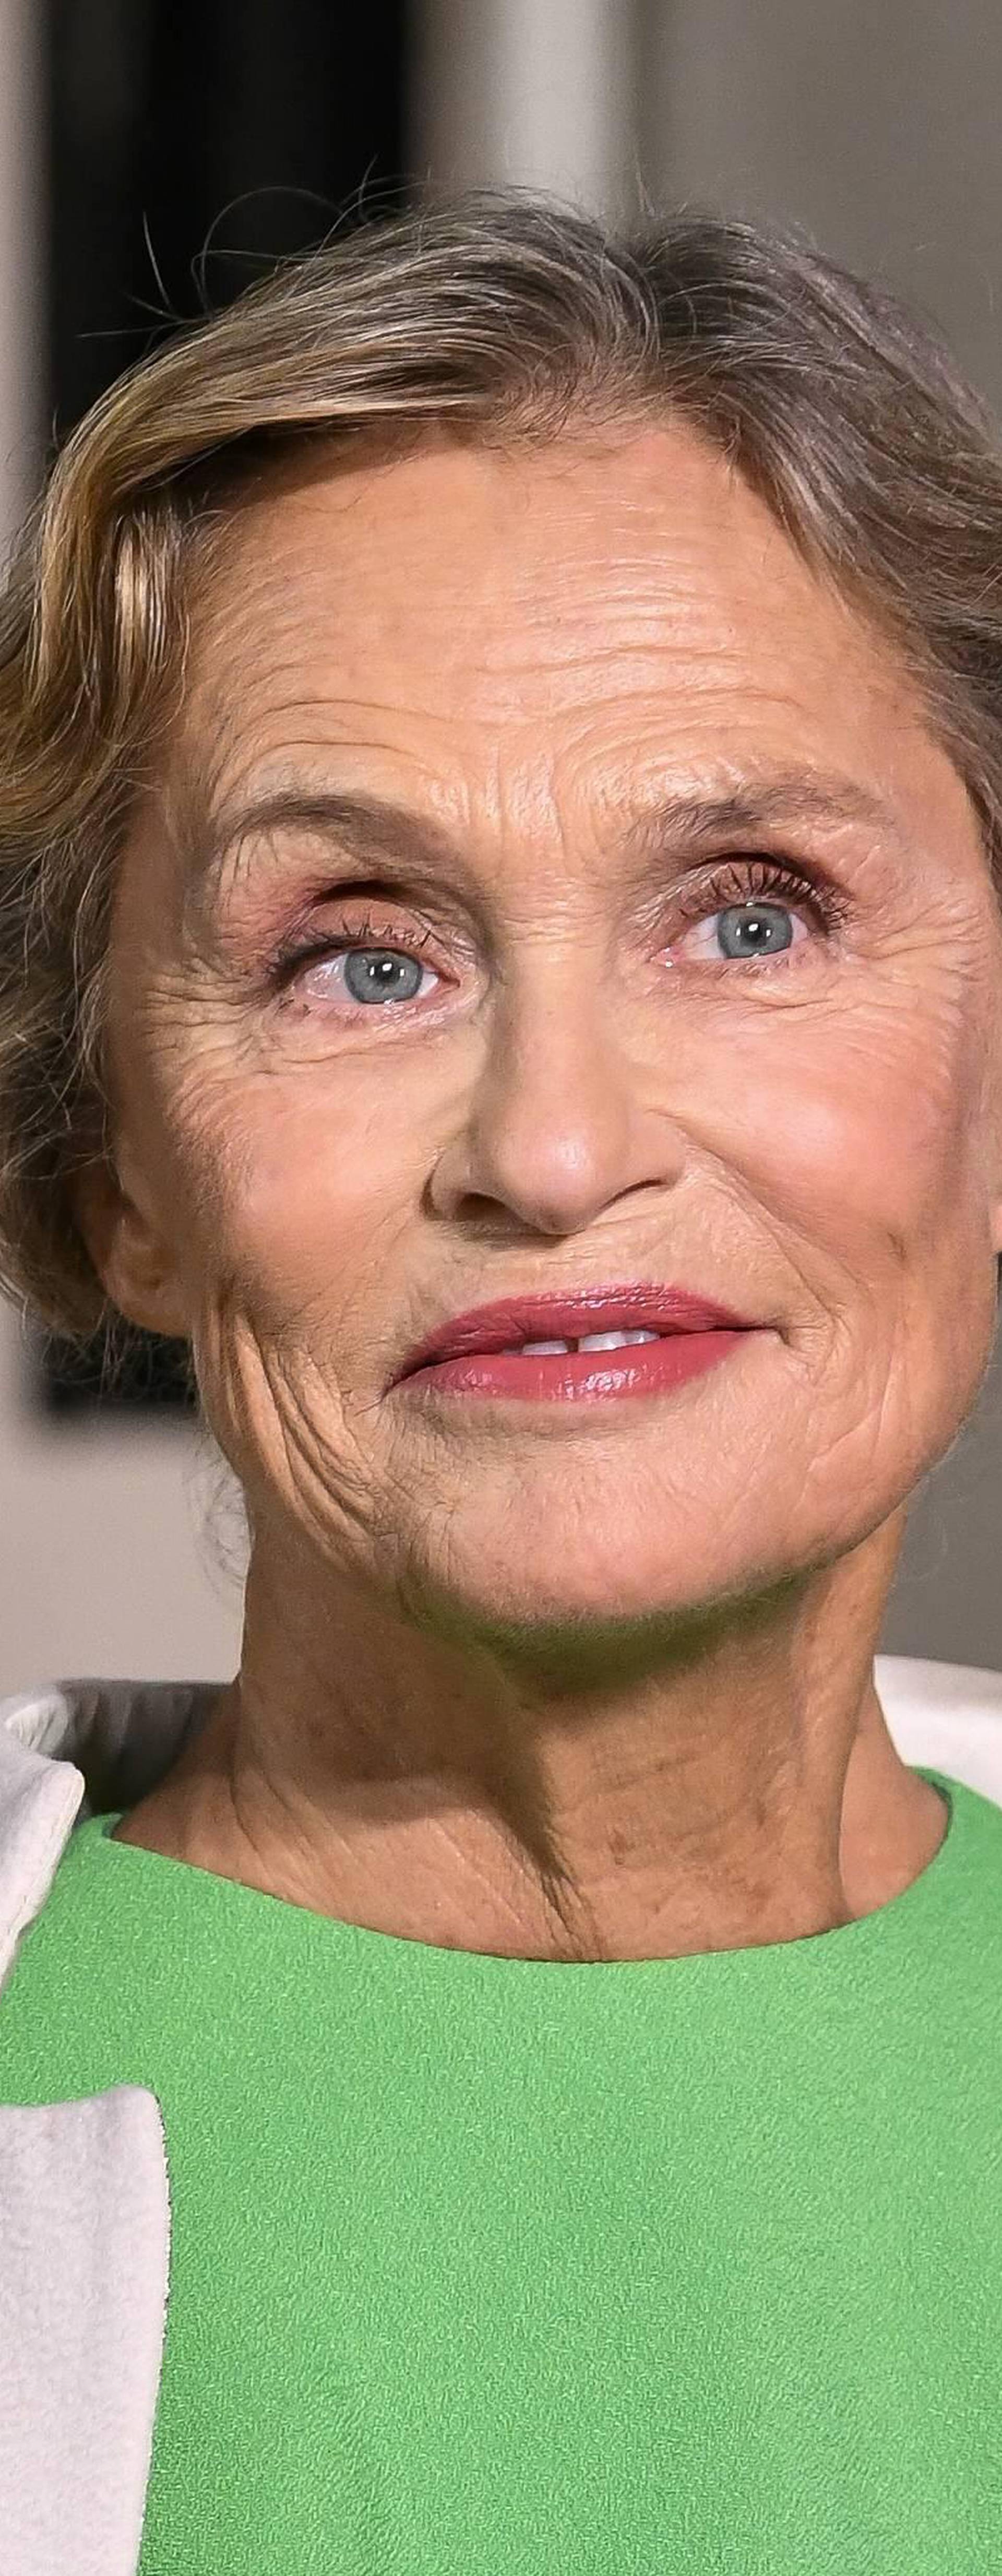 Lauren Hutton at VALENTINO AW19-20 Runway during Haute Couture Autumn Winter 2019/20 Collection - Paris, France 03/07/2019